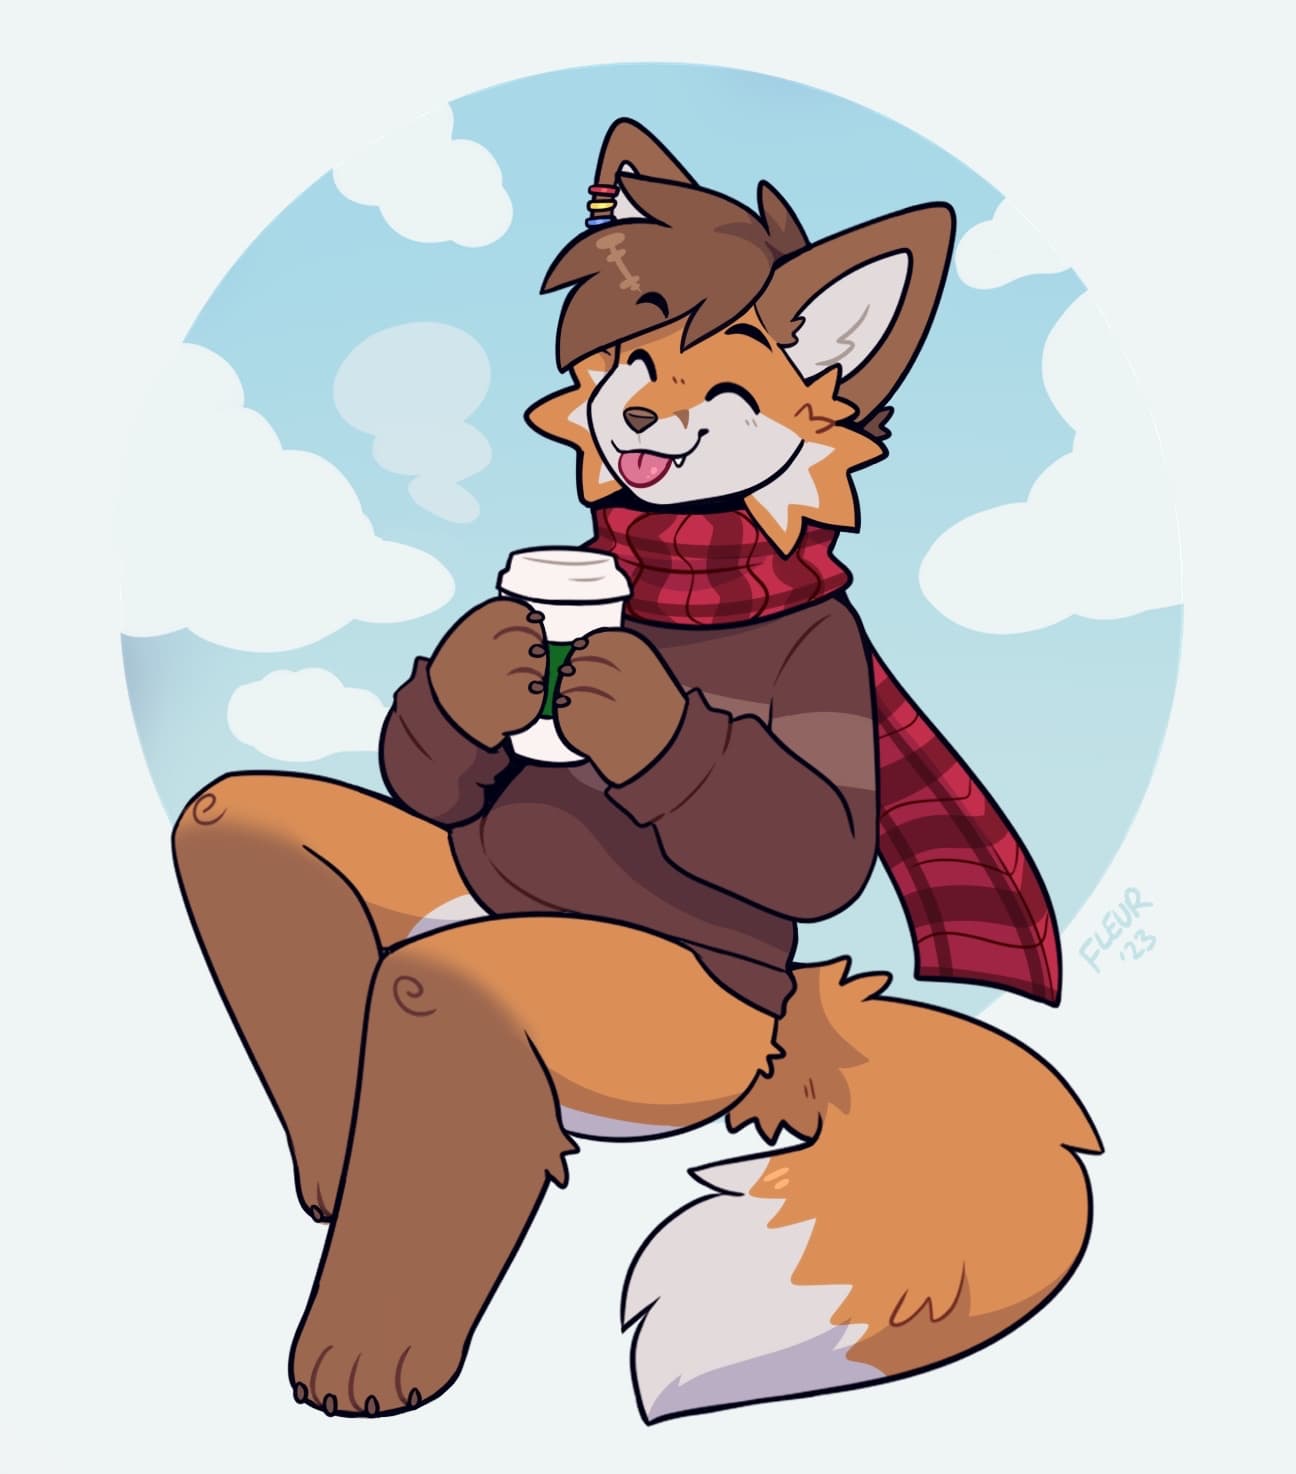 MochaFox drinking a cup of coffee and wearing a scarf